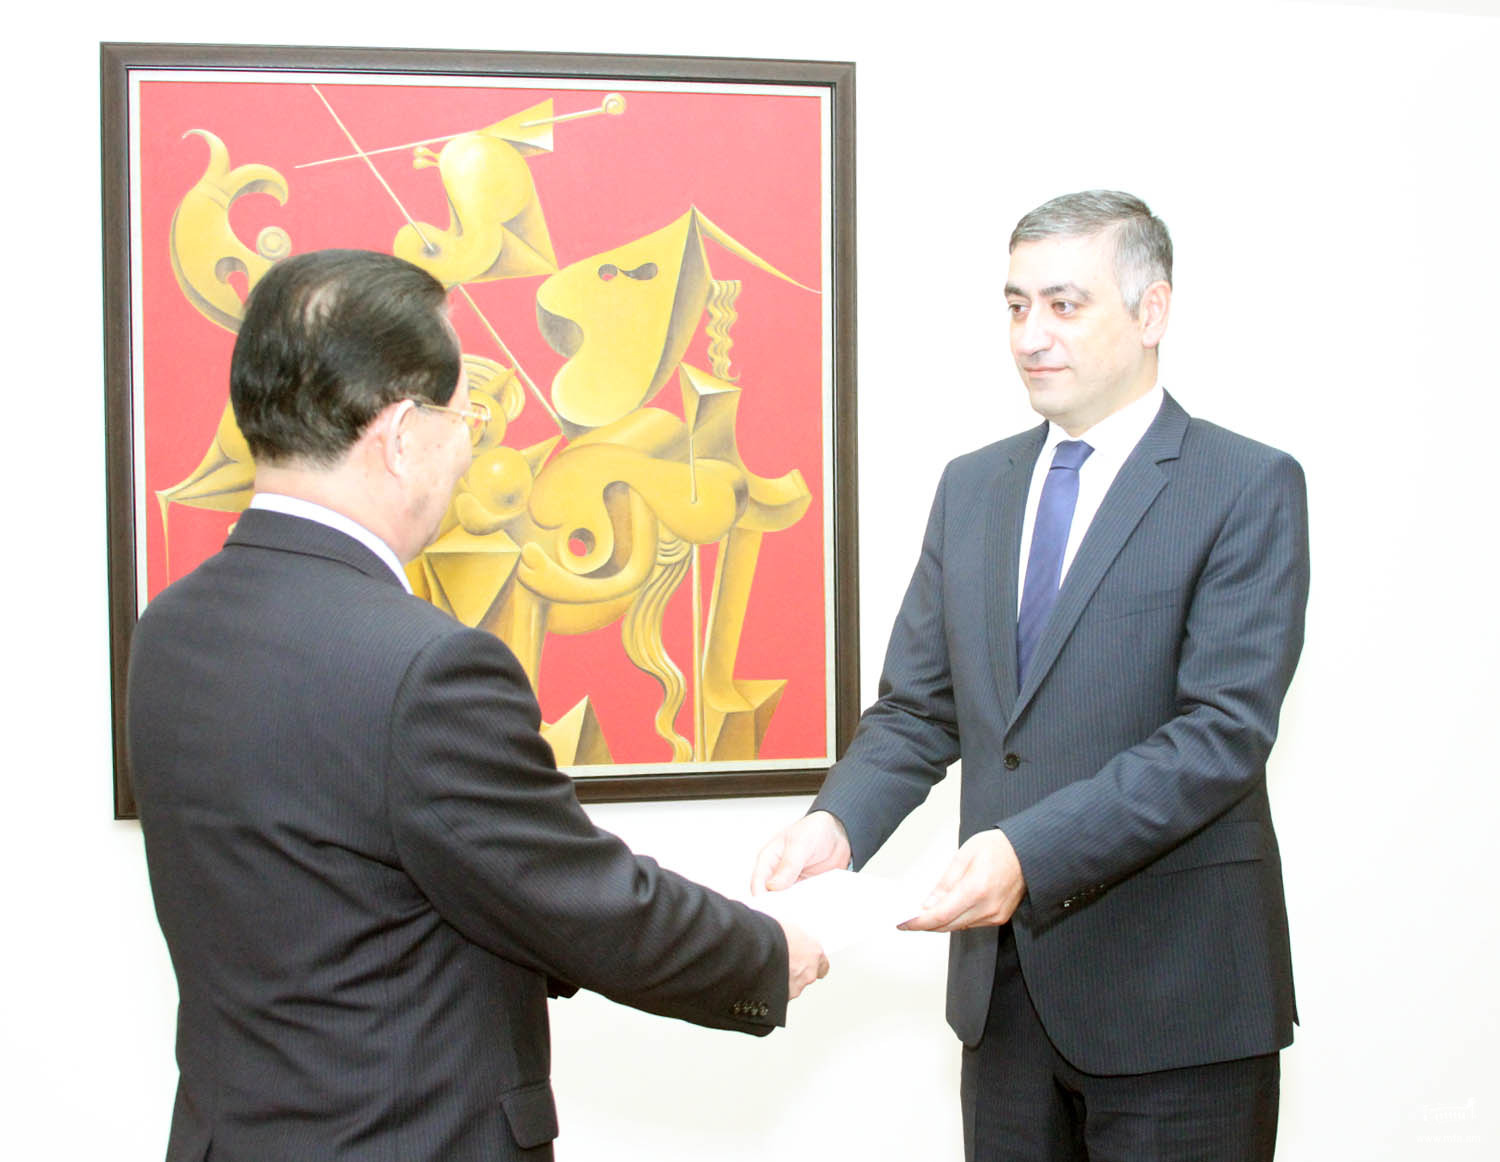 The Deputy Foreign Minister Armen Papikyan received Kim Hyun Joong, the newly-appointed Ambassador of DPRK to Armenia